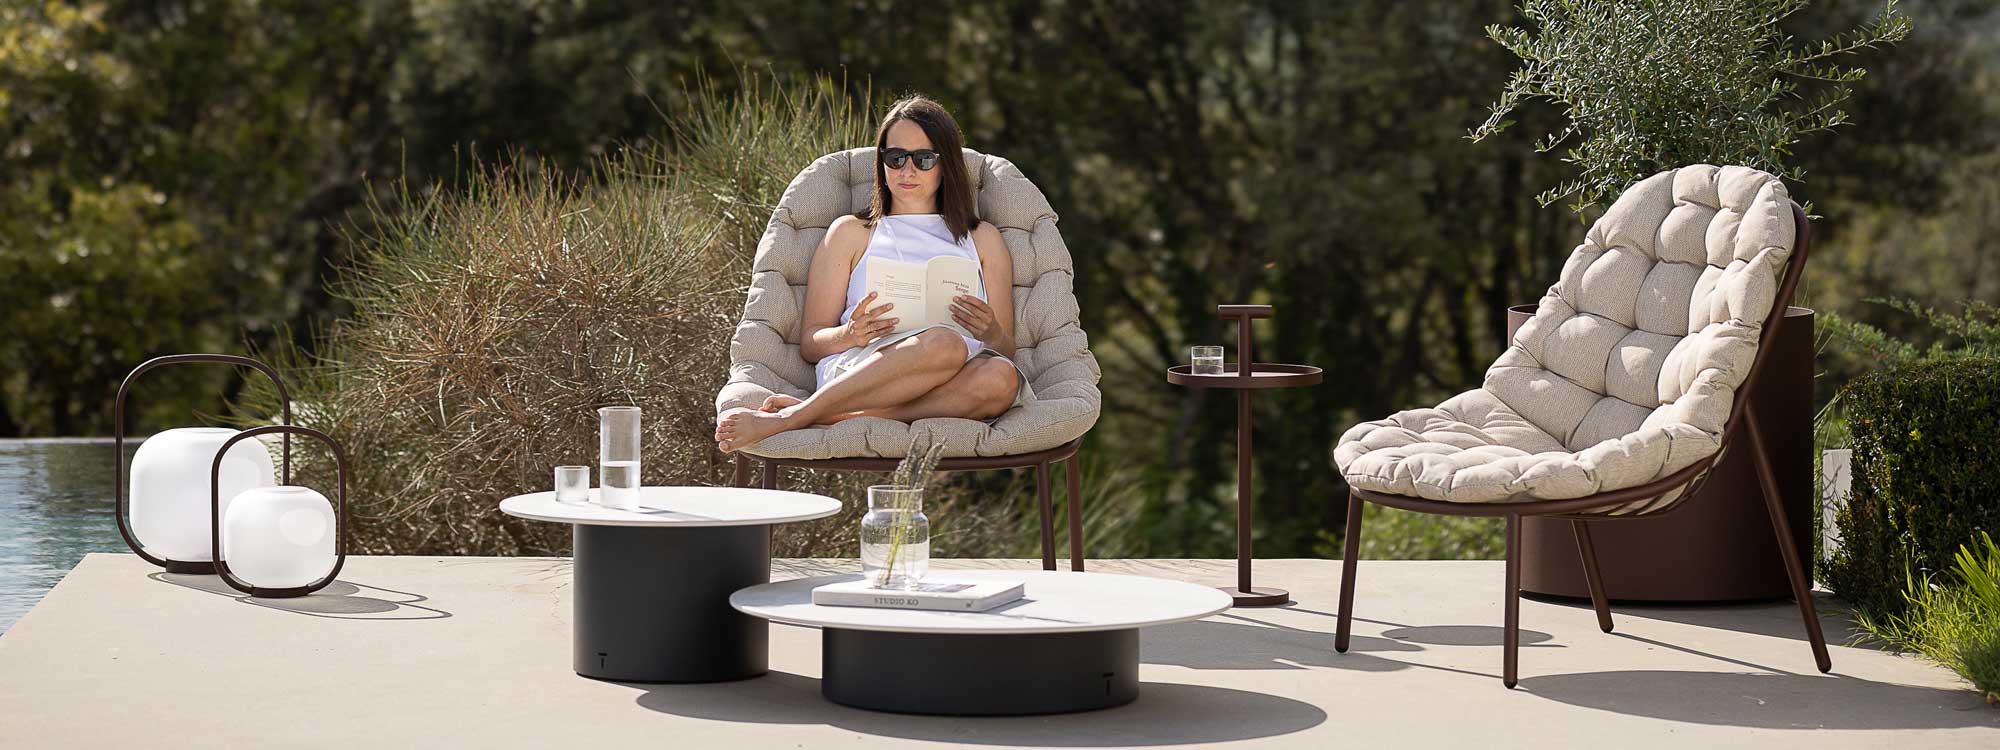 Image of woman sat reading on Todus Albus modern garden chair with Branta low tables in front of her, and Albus low table to one side